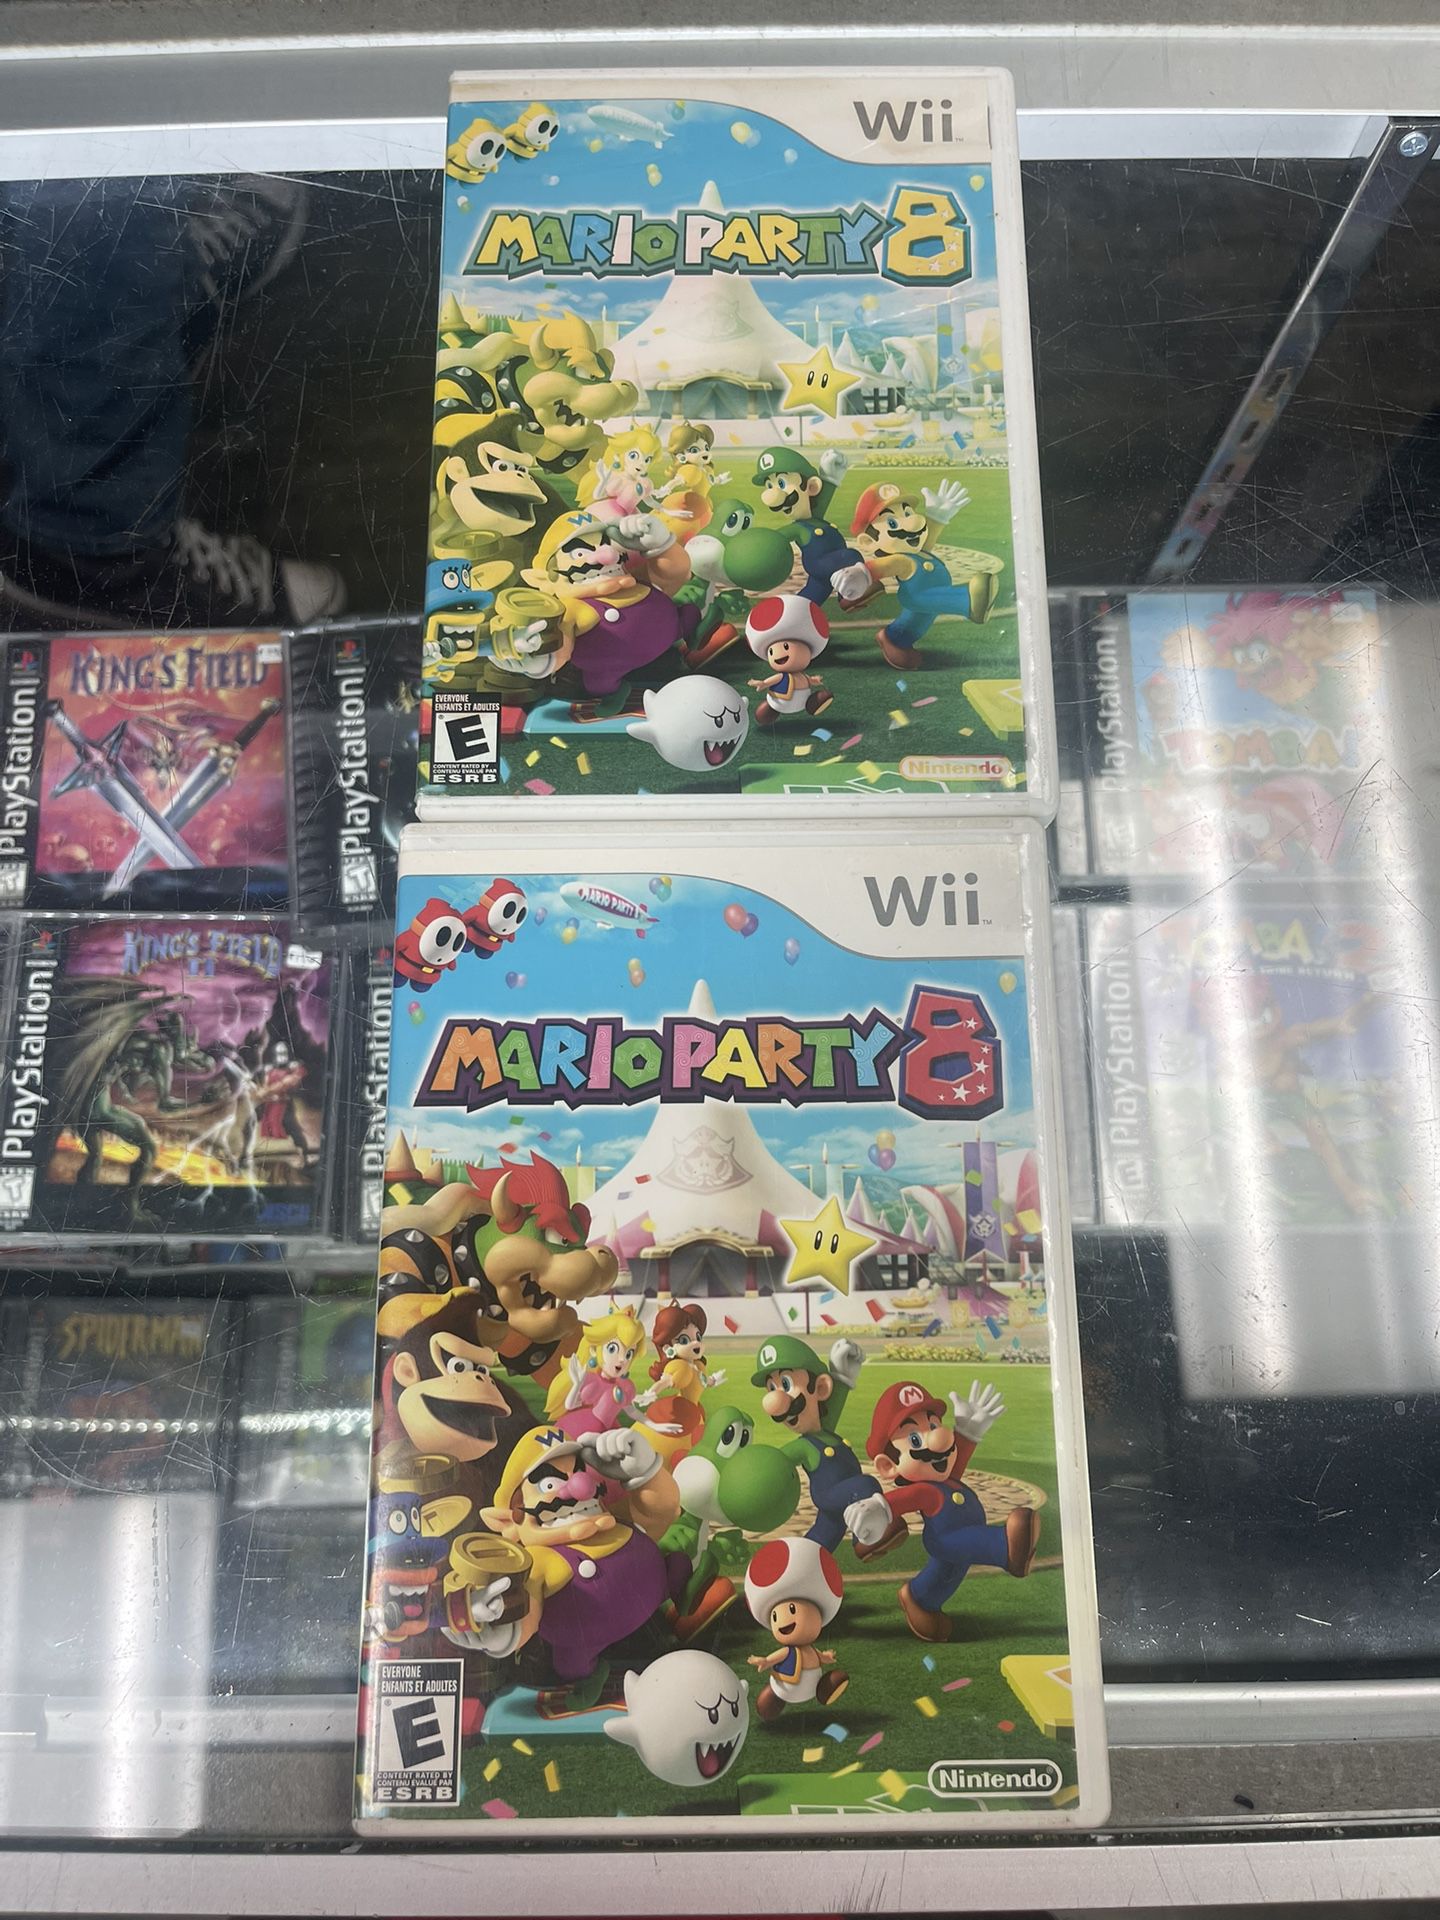 Mario Party 8 Wii $45-$50 Each Gamehogs 11am-7pm